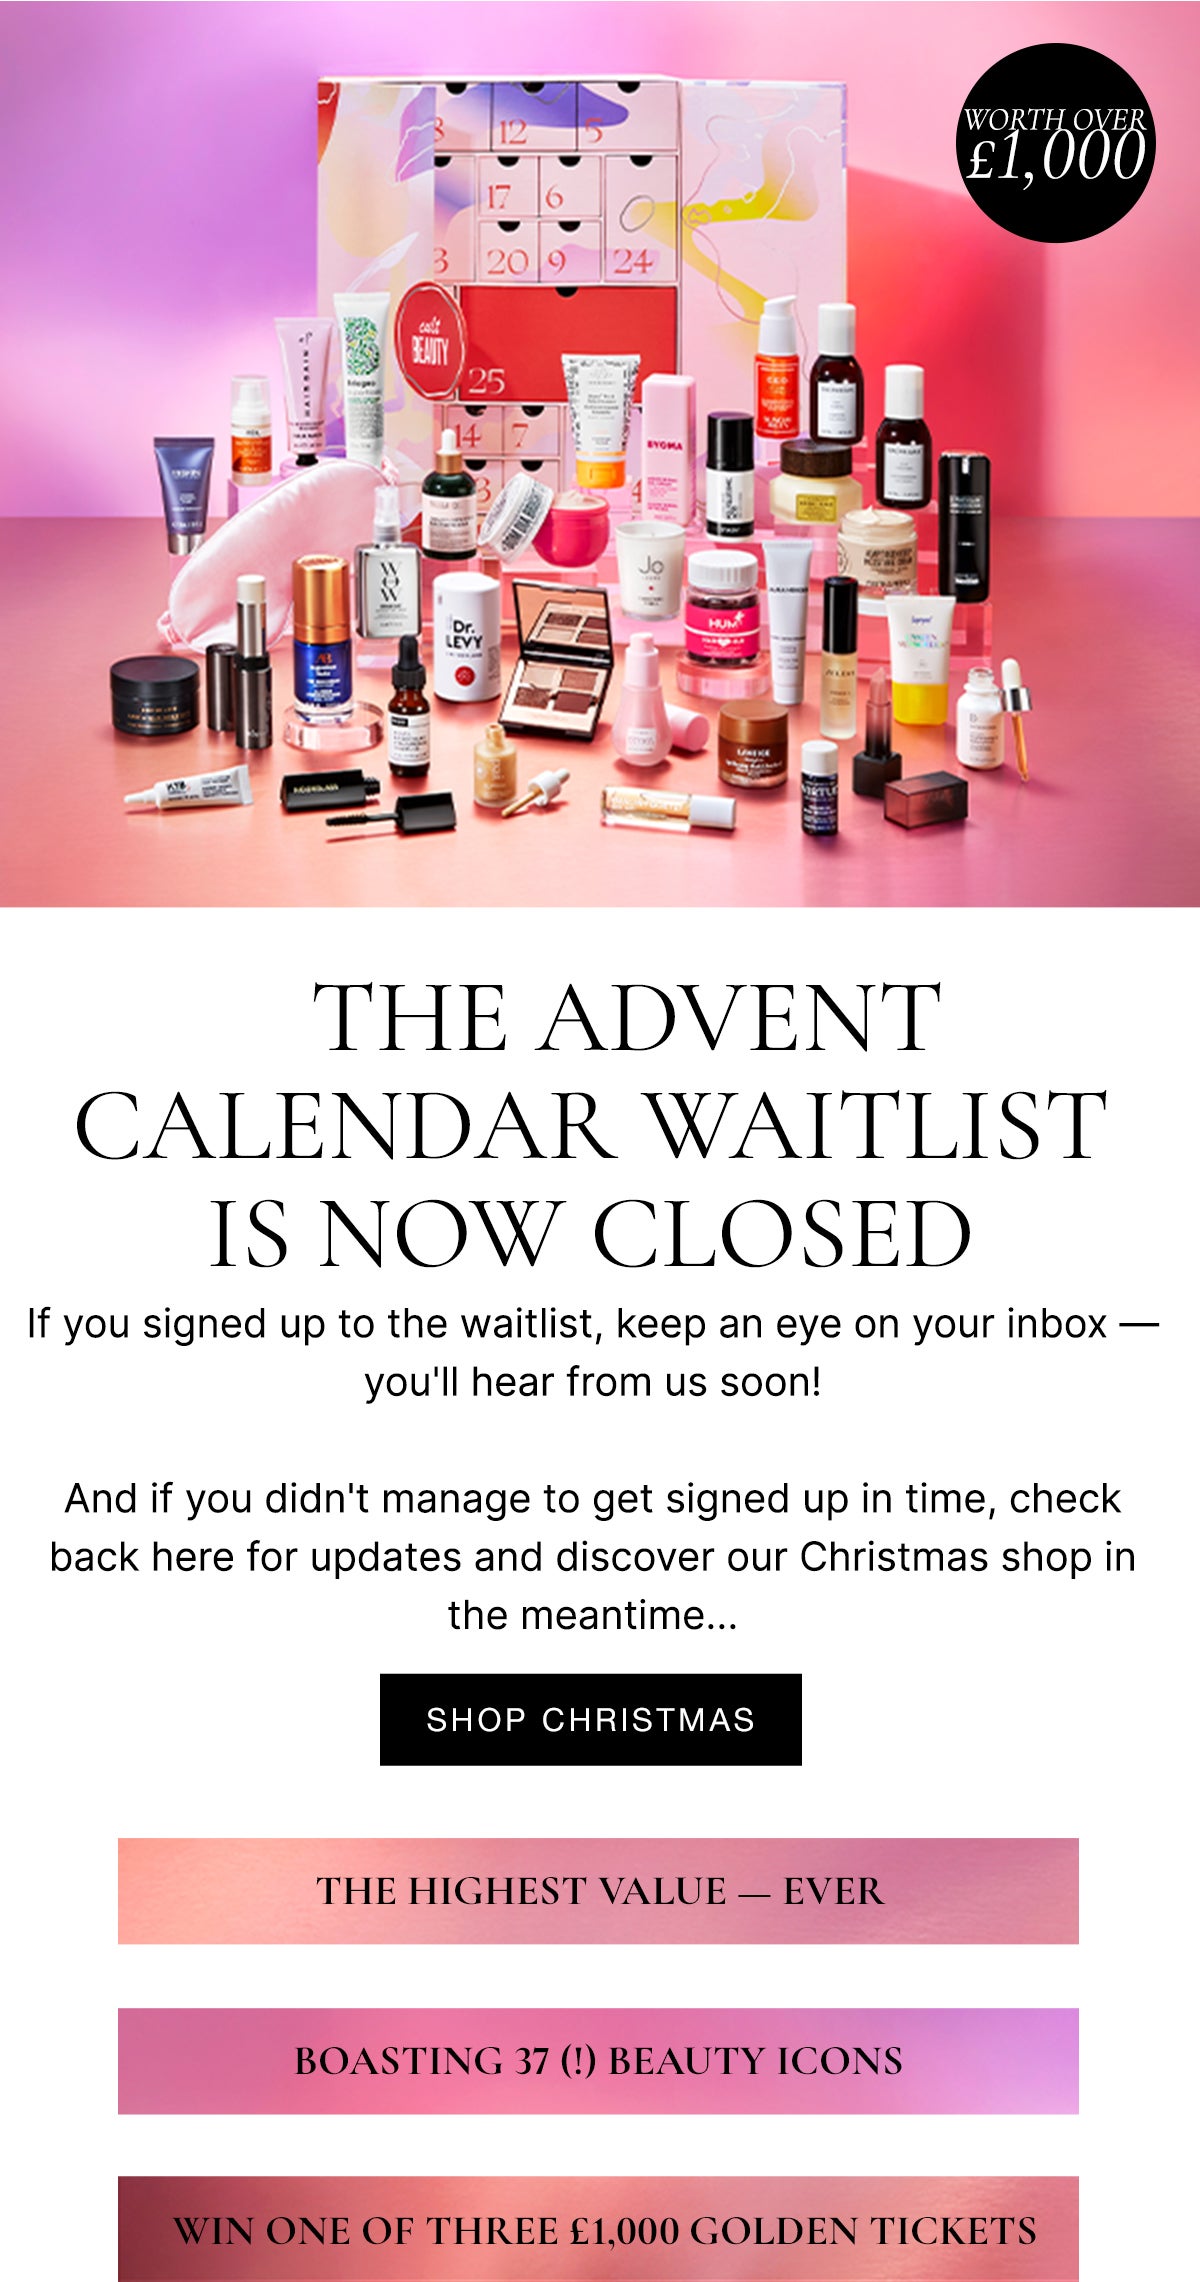 Coming Soon: The Advent Calendar Second Drop - The first drop has now sold out, but join our waitlist - if you haven't already - to find out when the second drop lands! The highest value ever, boasting 37 beauty icons, win one of three £1000 golden tickets!